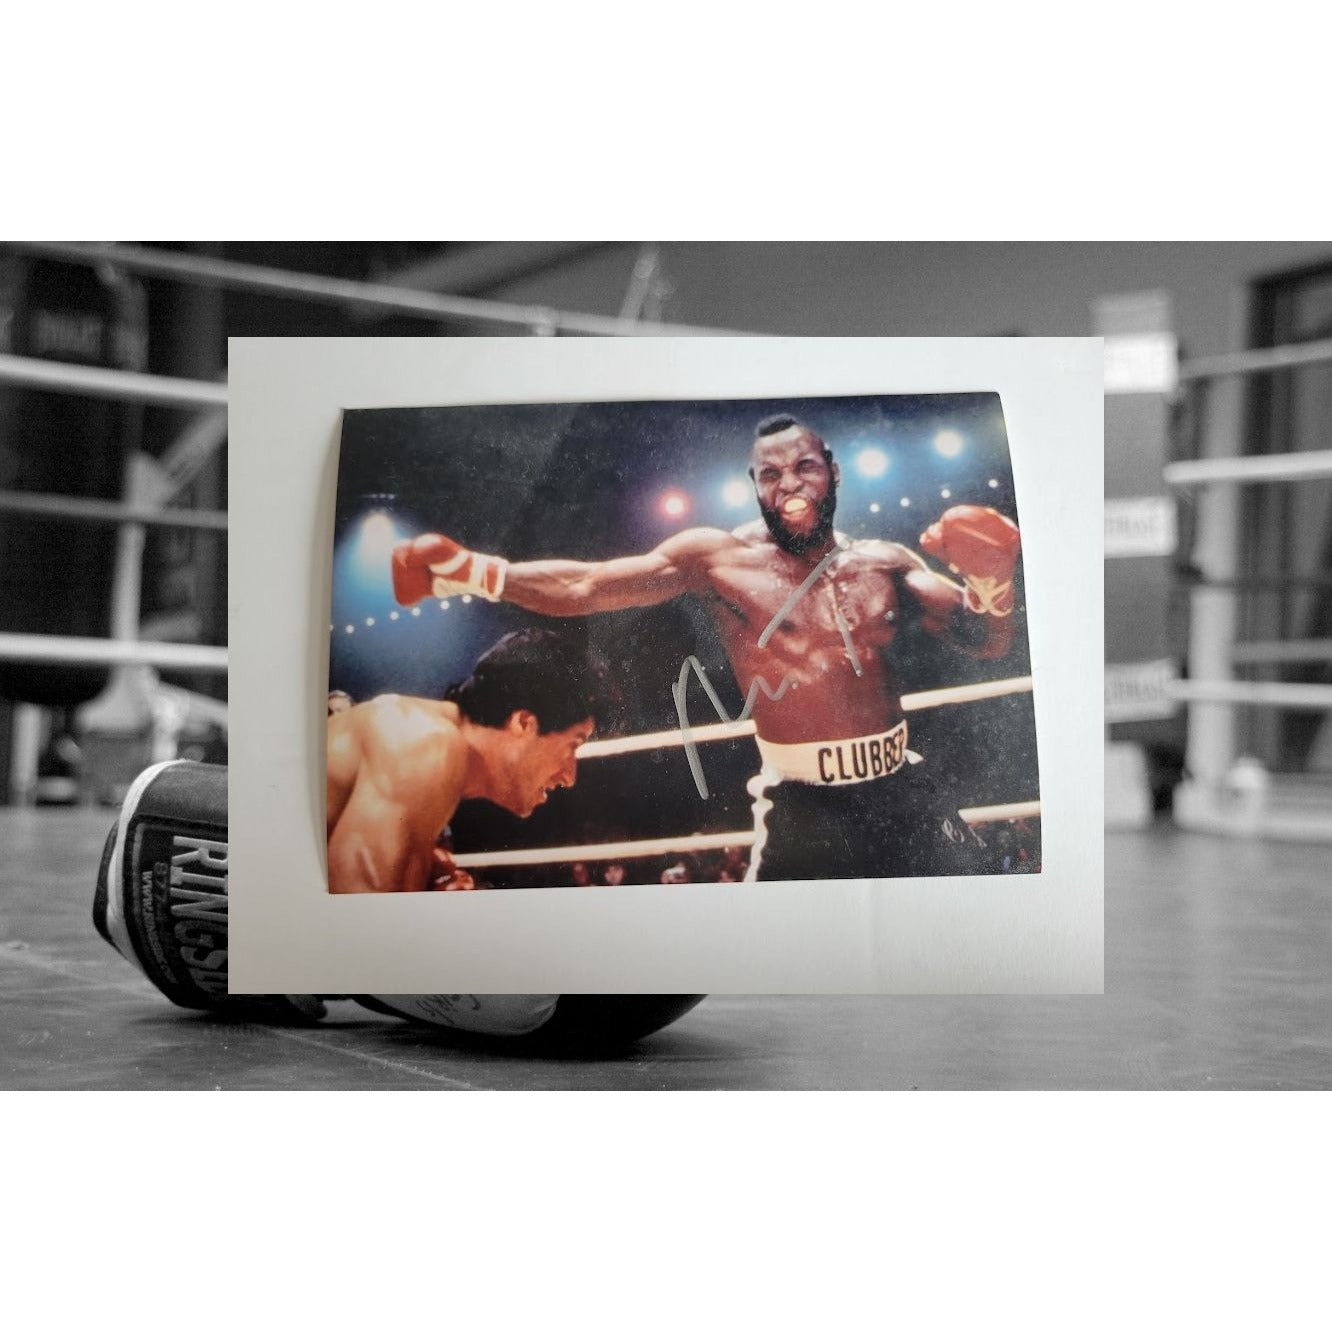 Mr. T "Clubber Lang" Rocky 5 x 7 photograph signed